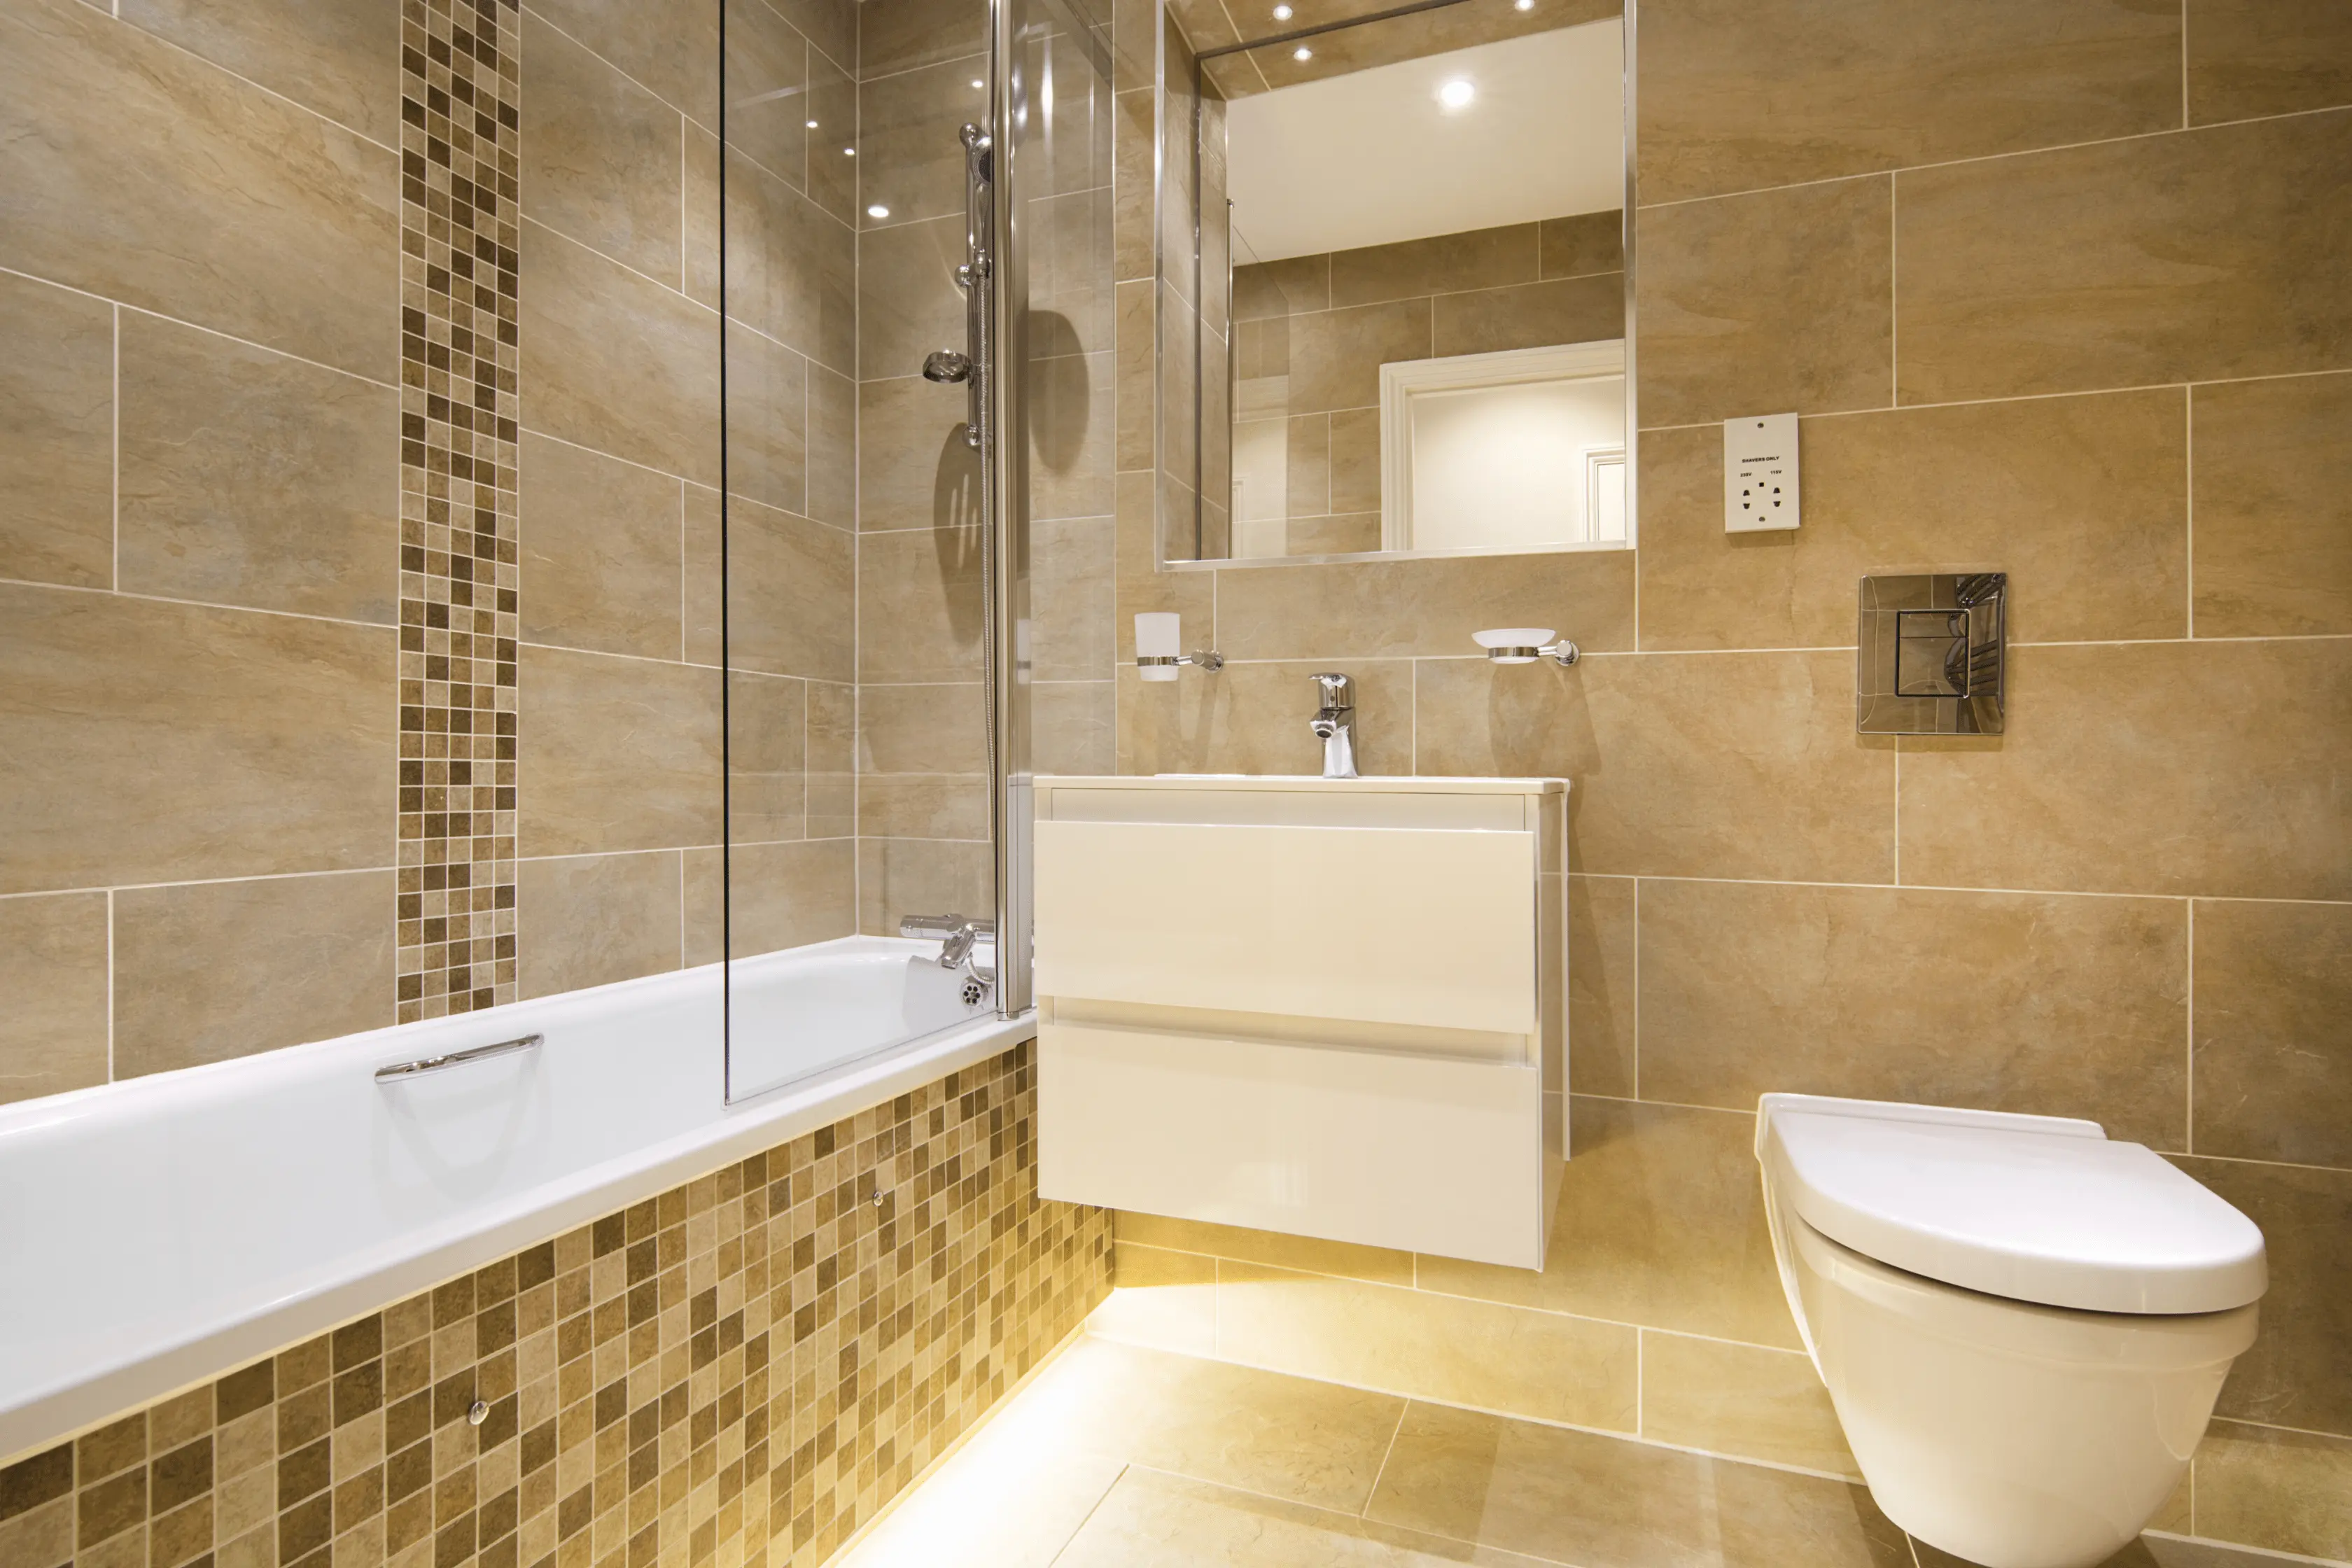 Shower Bath With Tiled Wall And Vanity Unit